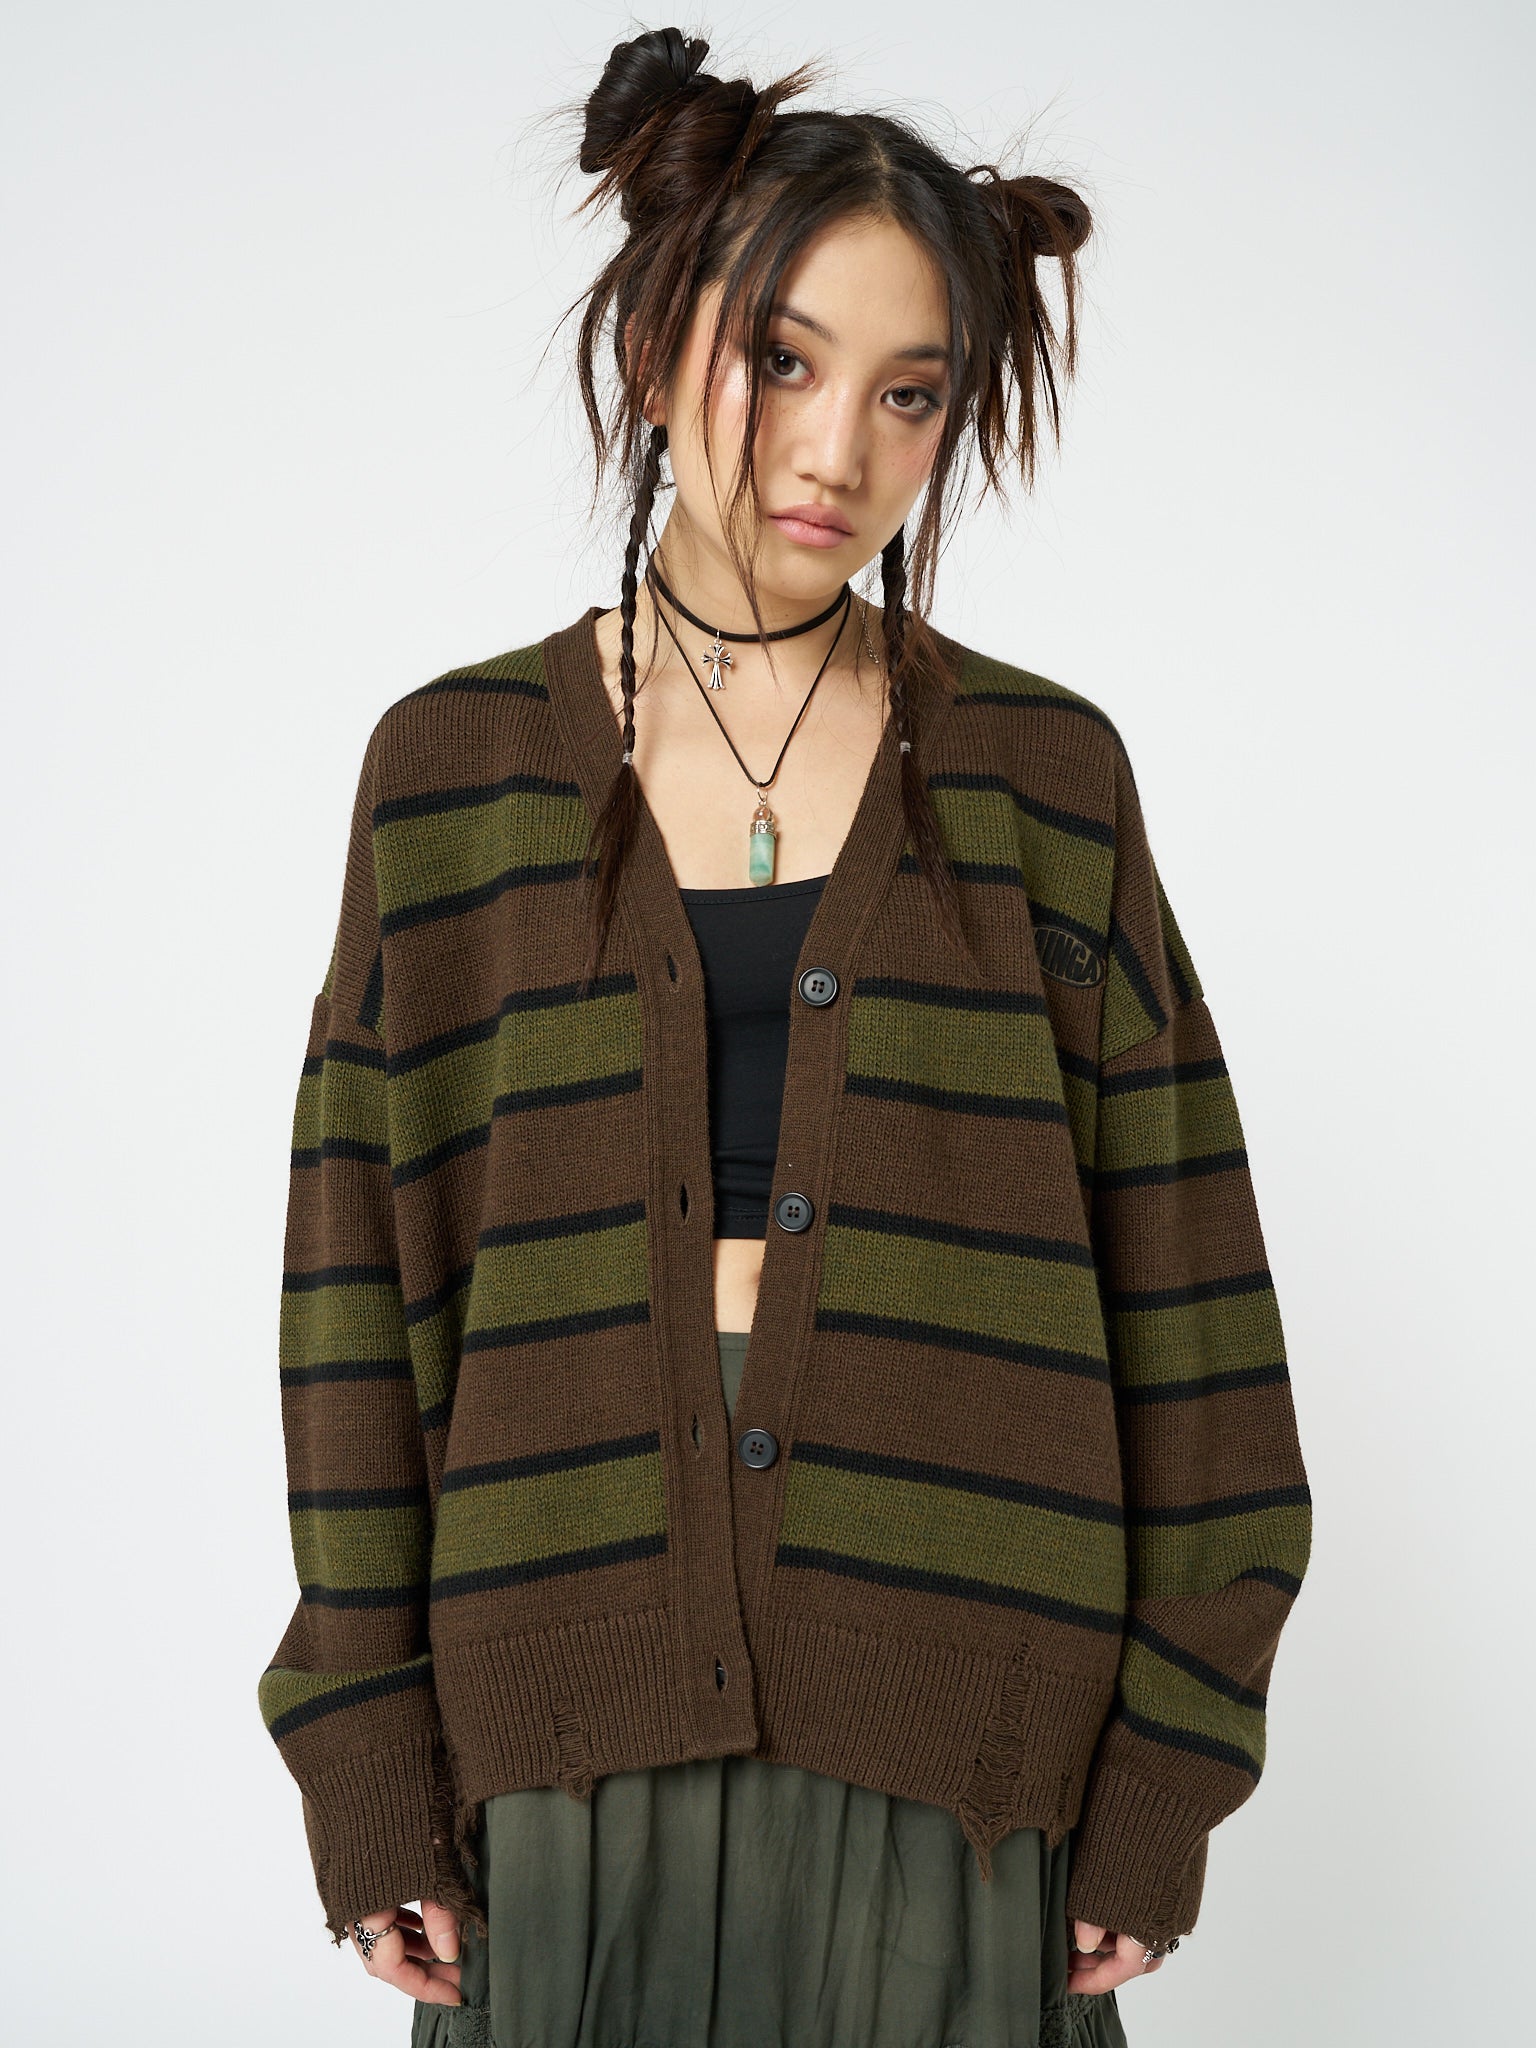 Relaxed fit knit cardigan named Neesa by Minga London, with brown and green stripes, providing a comfortable and stylish option for your casual outfits.